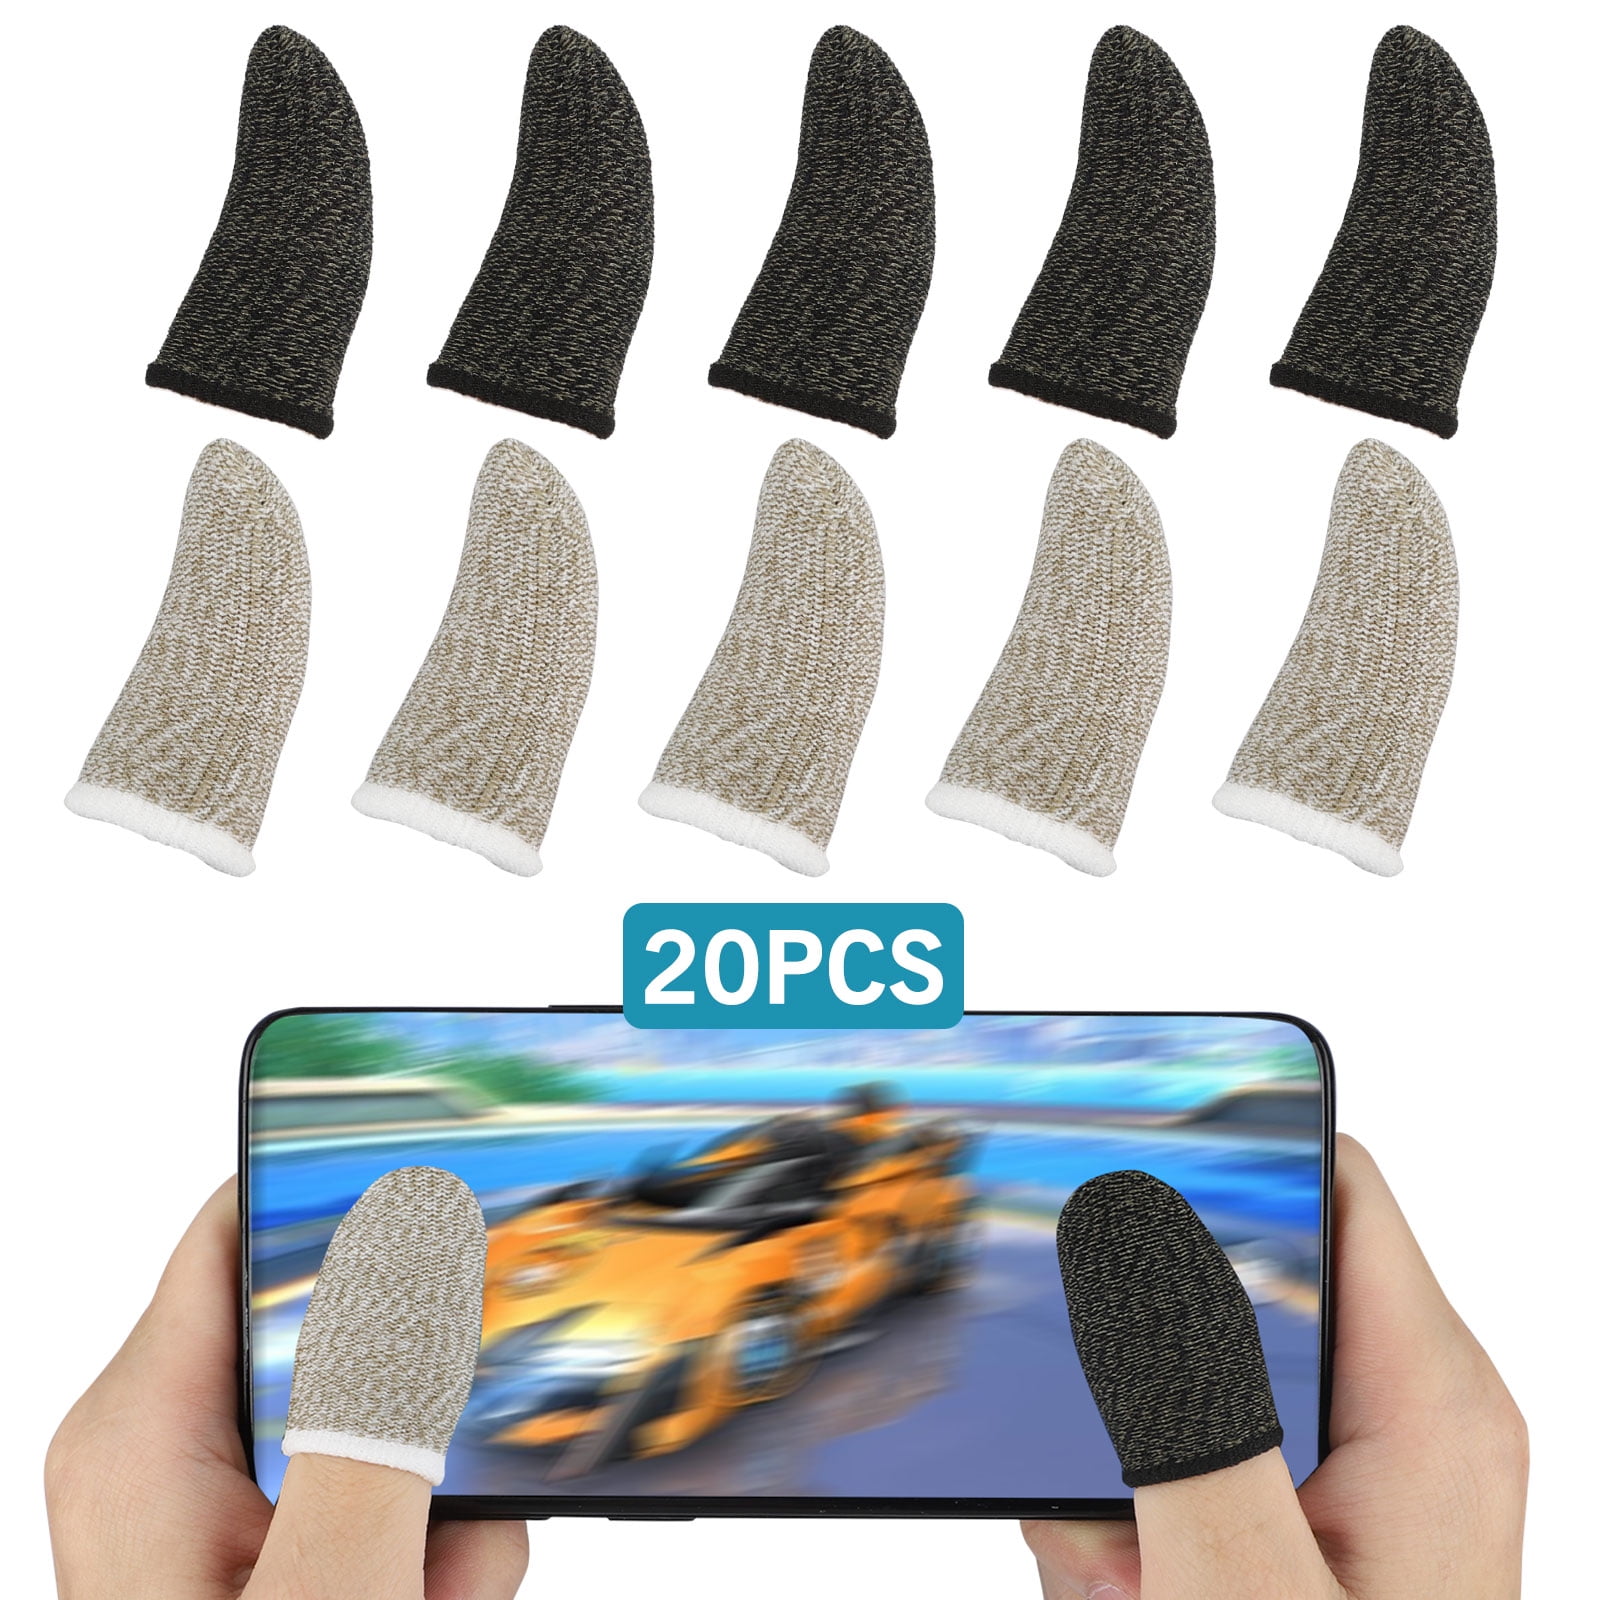 Gaming Finger Sleeve Touchscreen Sleeve 30pcs Anti Sweat Breathable Finger Cover for Mobile Phone Games 